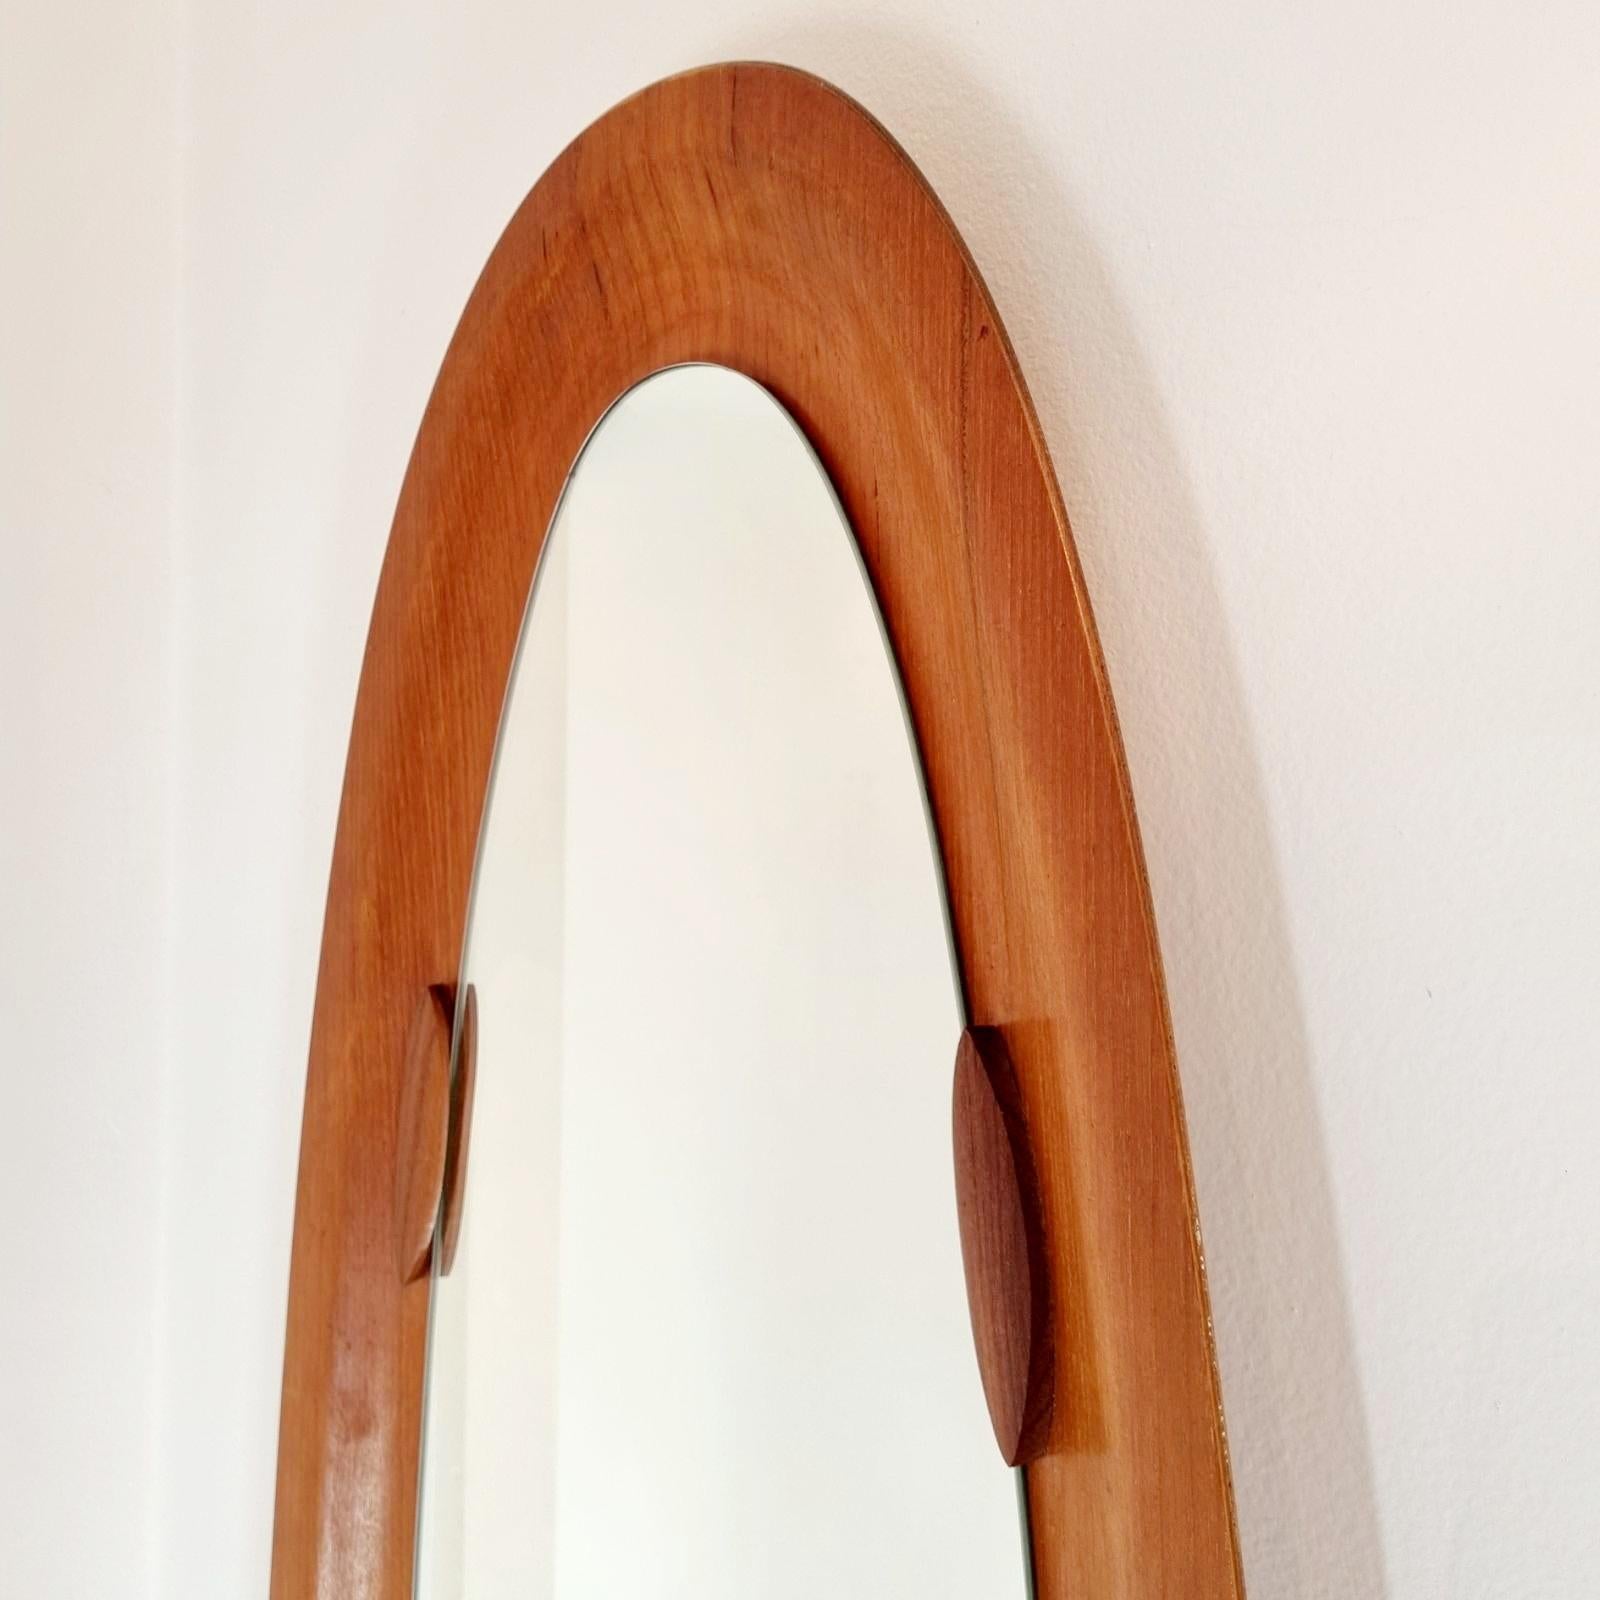 Mid-Century Oval Teak Wall Mirror, Designed by Campo e Graffi, Italy 60s For Sale 1